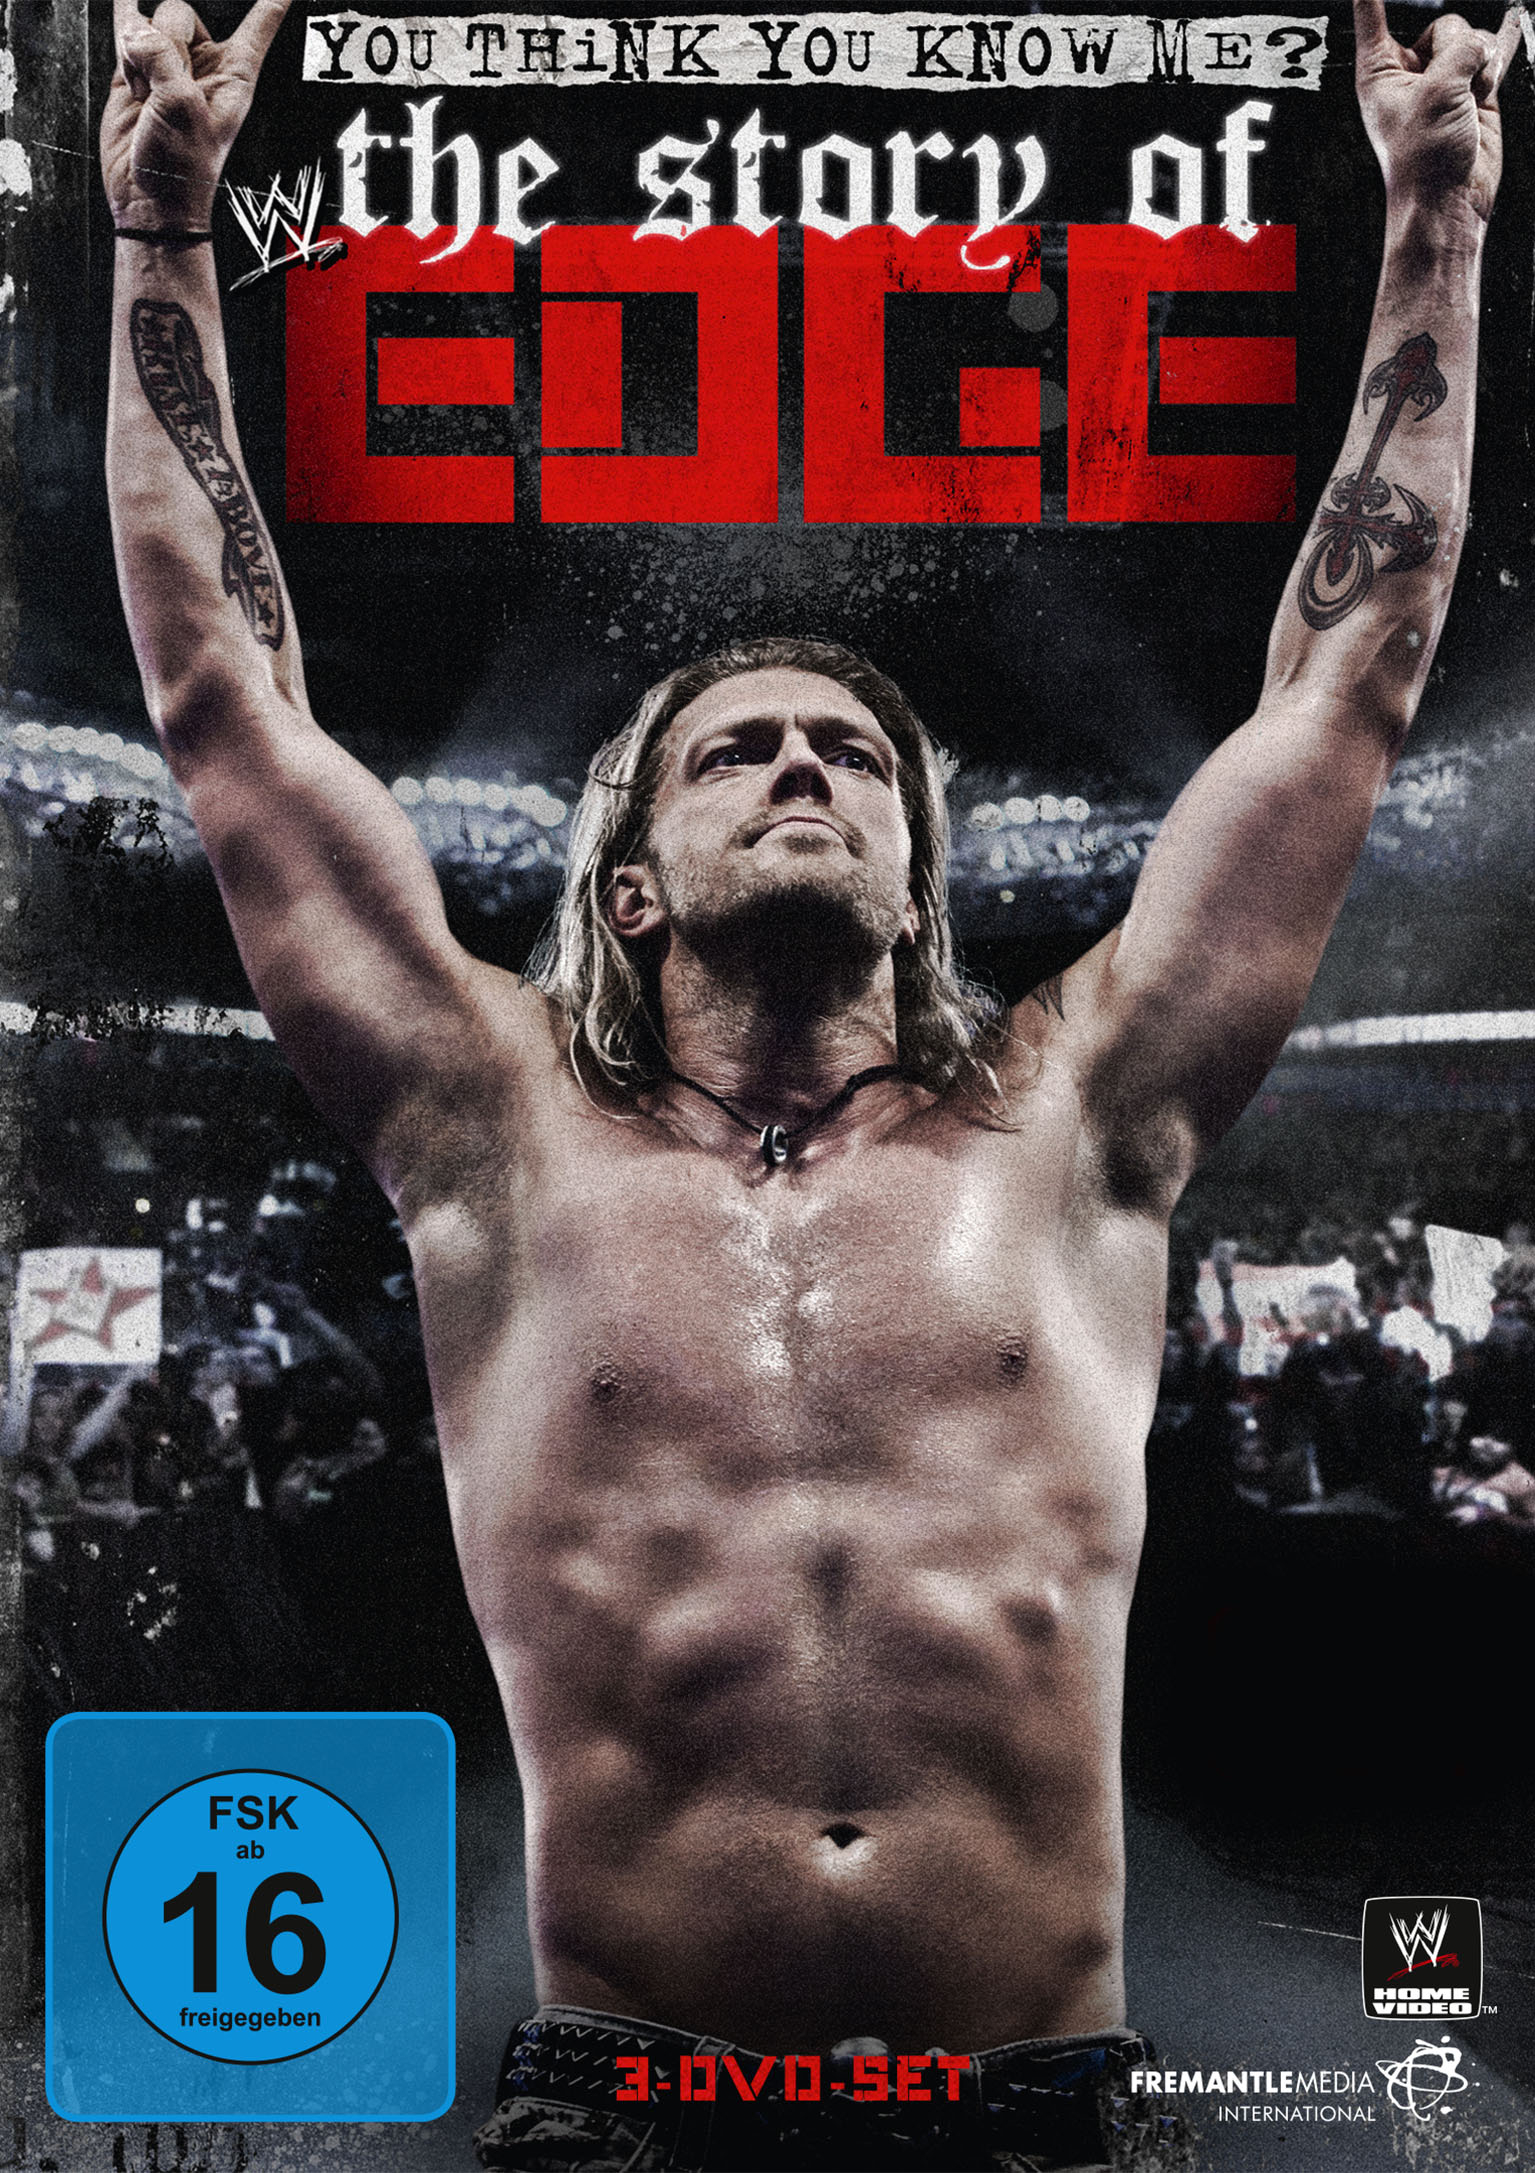 WWE - DVD of Edge Me? Know The Think You Story You